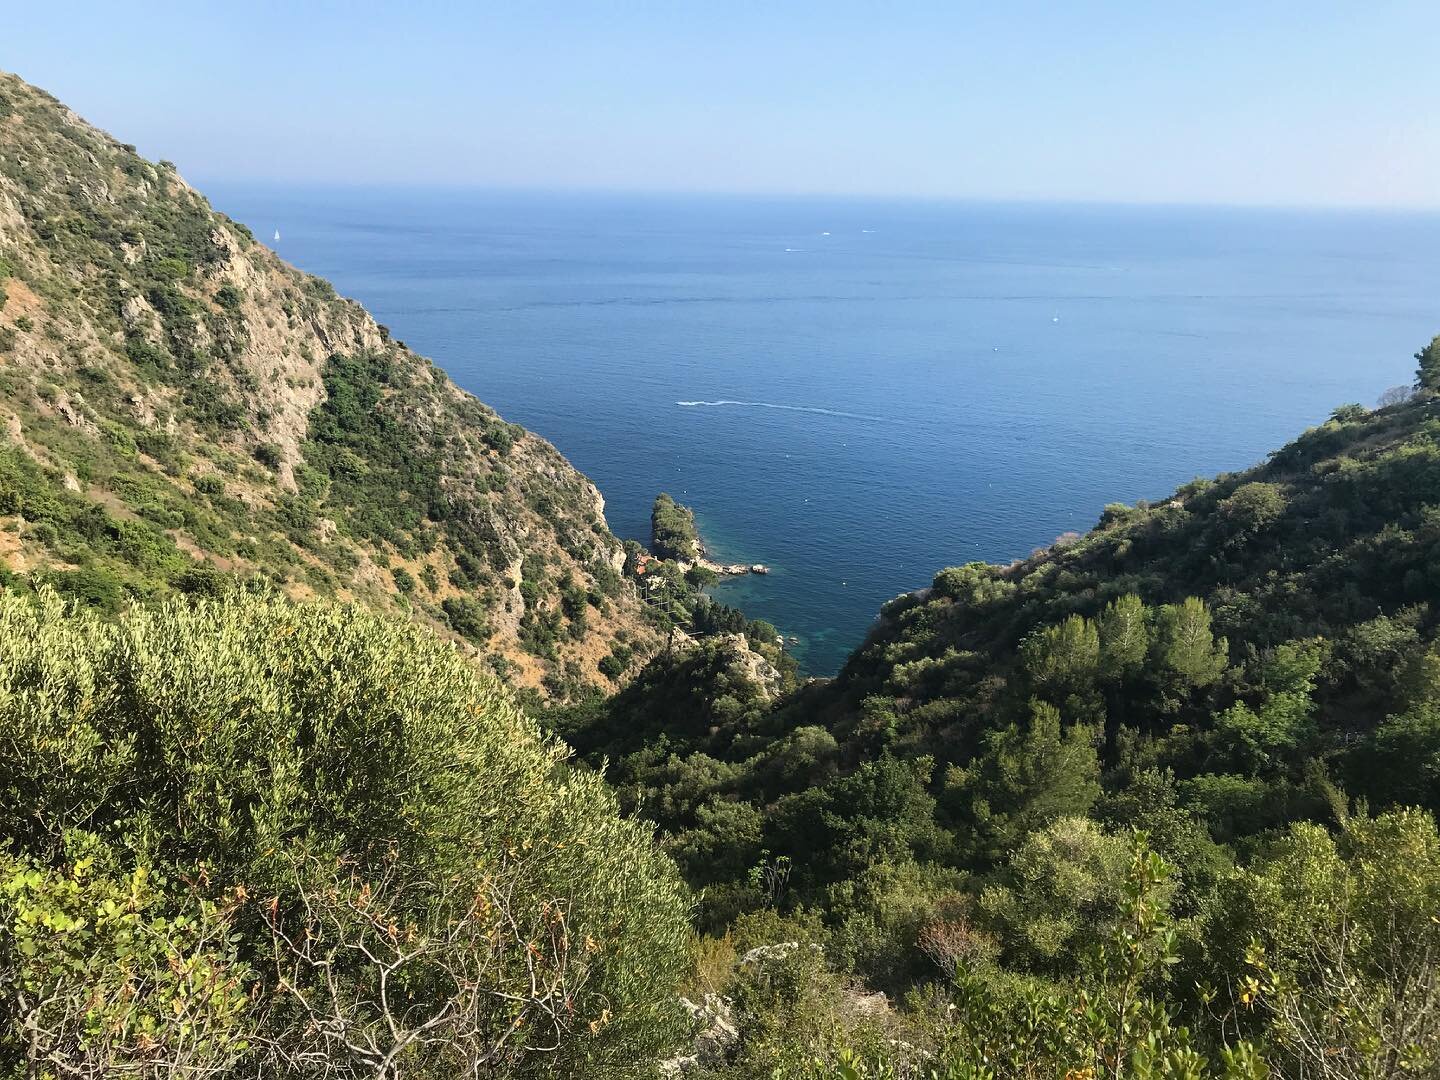 Ocean views in &Egrave;ze from the Nietzsche trail. 

Two years ago I got to celebrate my birthday with some of my best friends in an Airbnb in &Egrave;ze. Despite a brutal record-breaking heat wave, it was one of the most memorable birthdays of my l